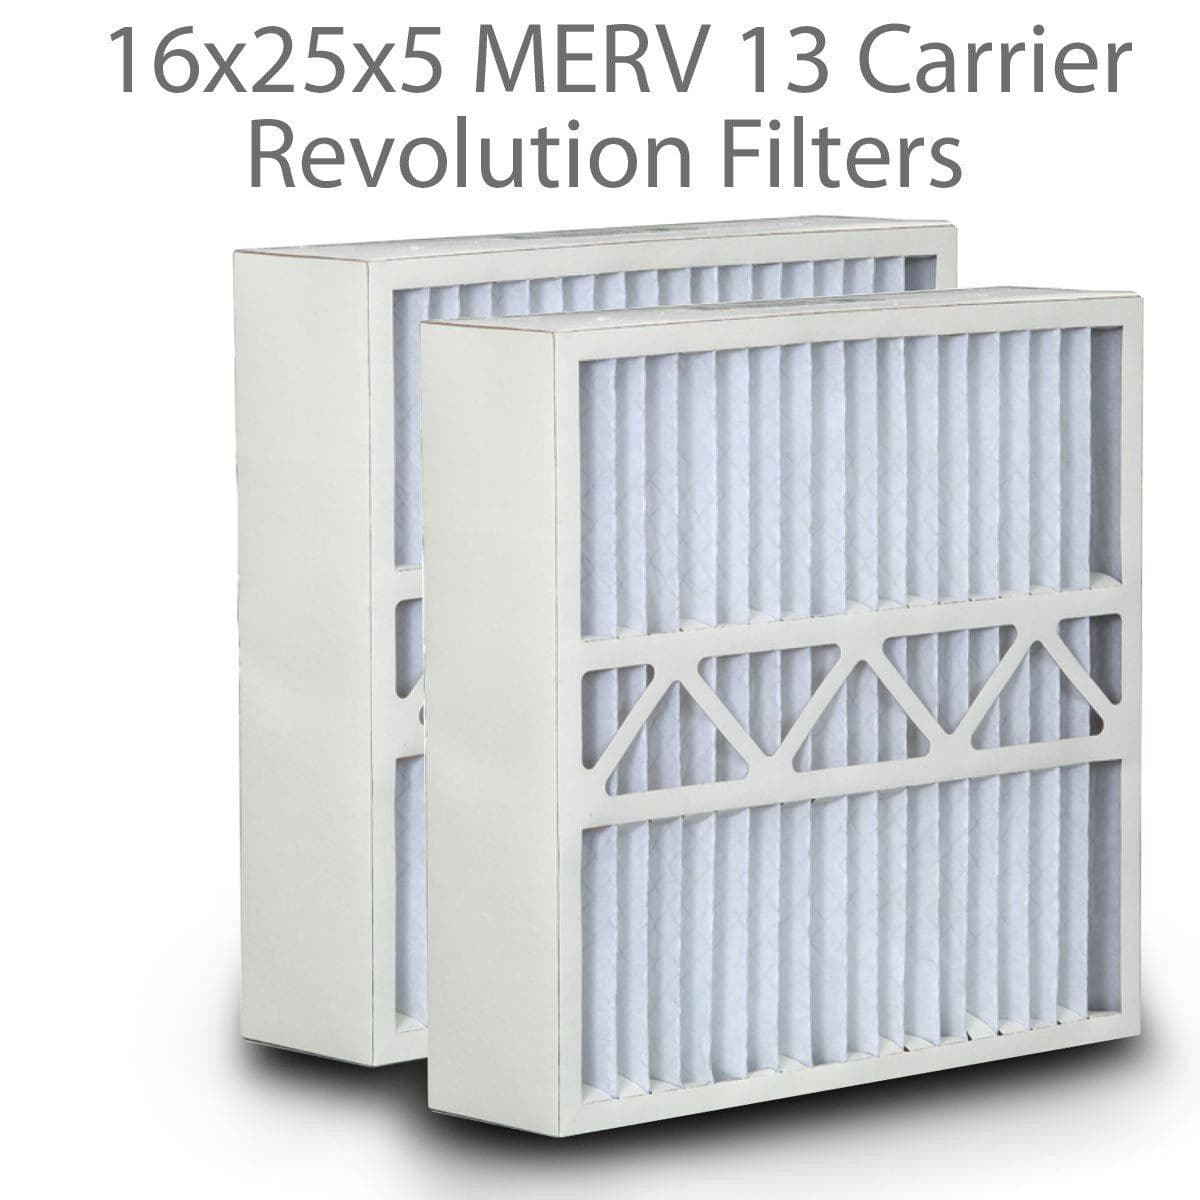 16x25x5 MERV 13 Carrier Compatible by Atomic